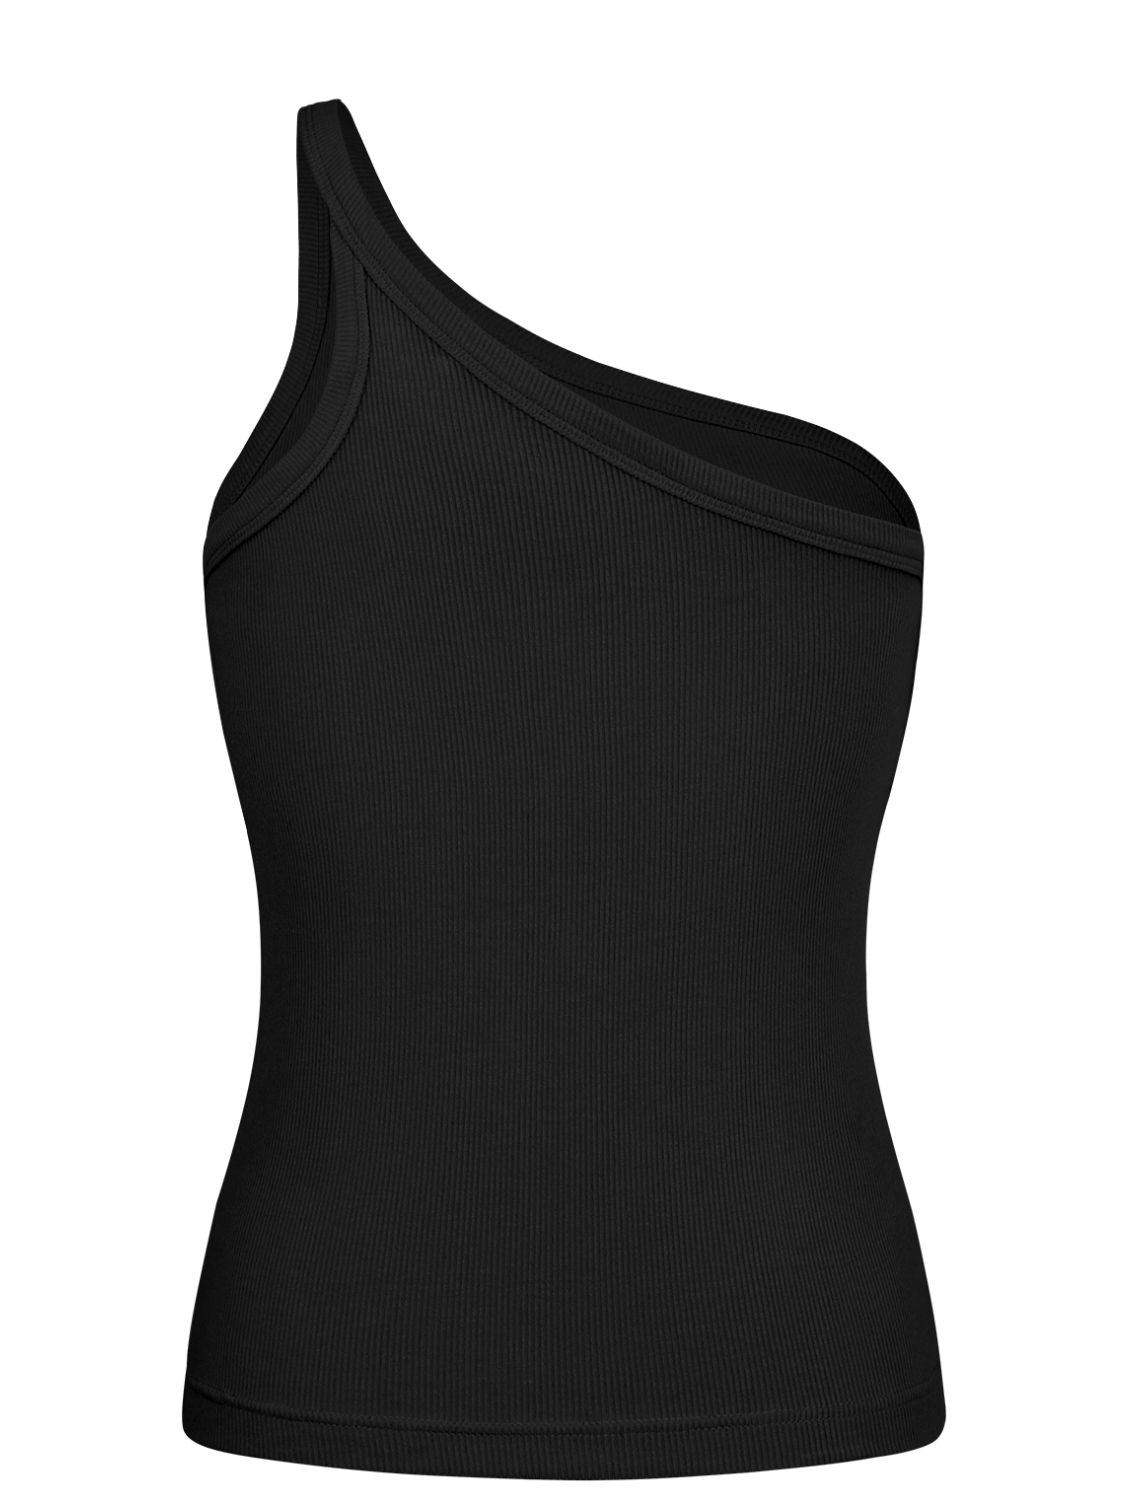 The Fifi Ribbed One-Shoulder Tank